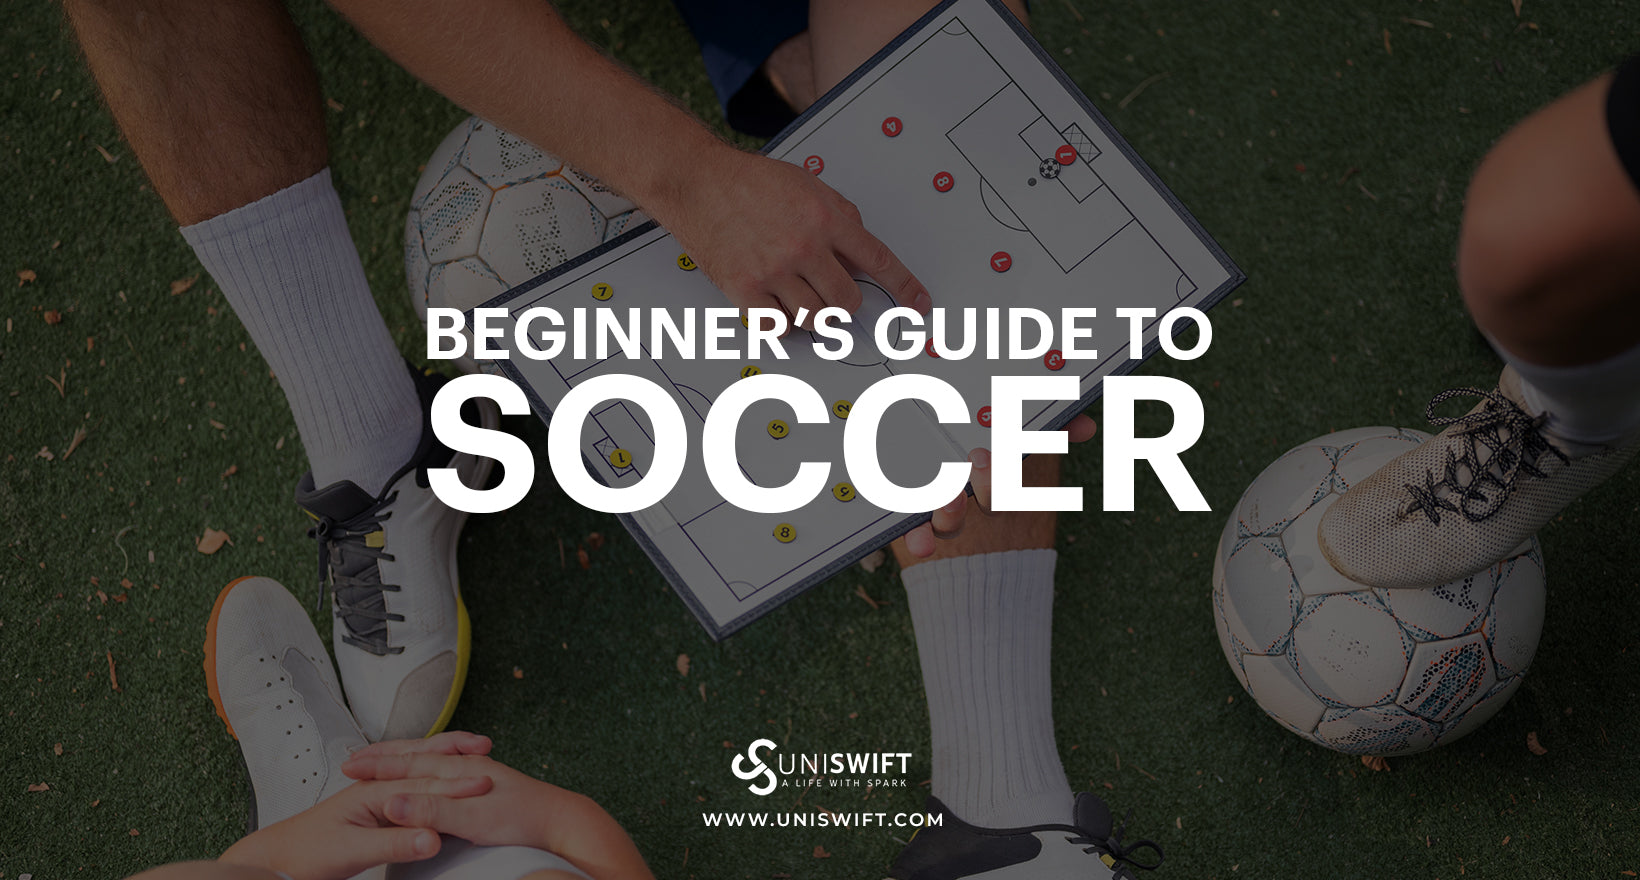 Play like a Pro: A Beginner’s Guide to Soccer